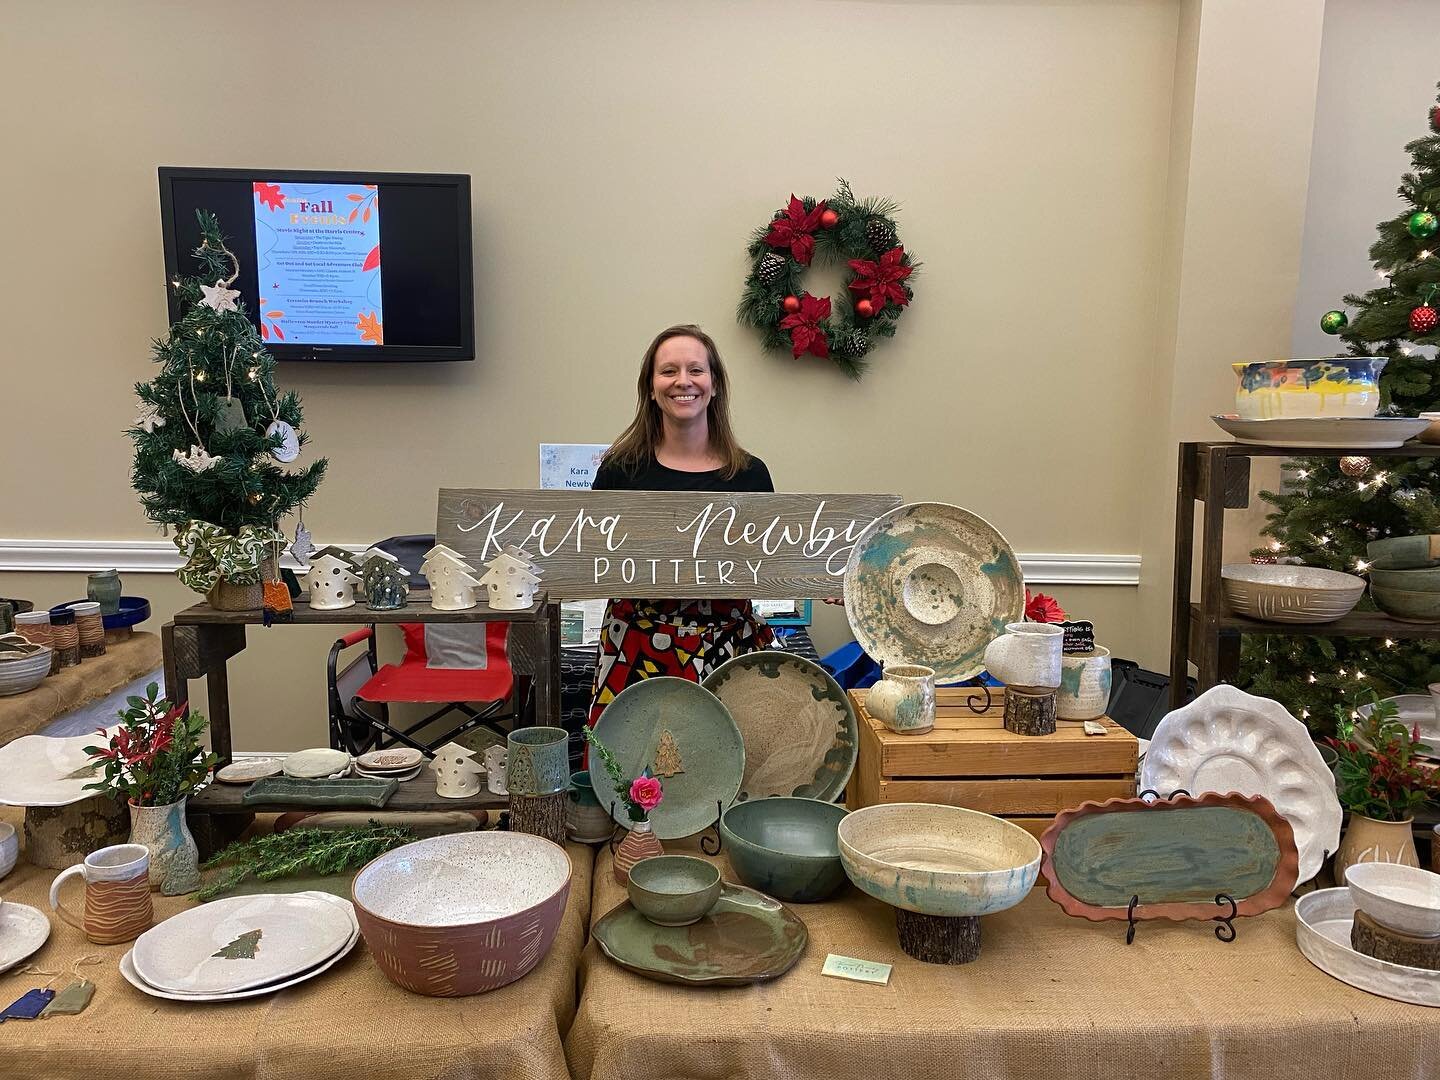 THANK YOU to everyone who came out to the Holiday Art Show! Y&rsquo;all are awesome and always encourage me so much! I&rsquo;m so thankful for this amazing community! If I missed you today, come by and see me in Downtown Auburn on Dec 3.